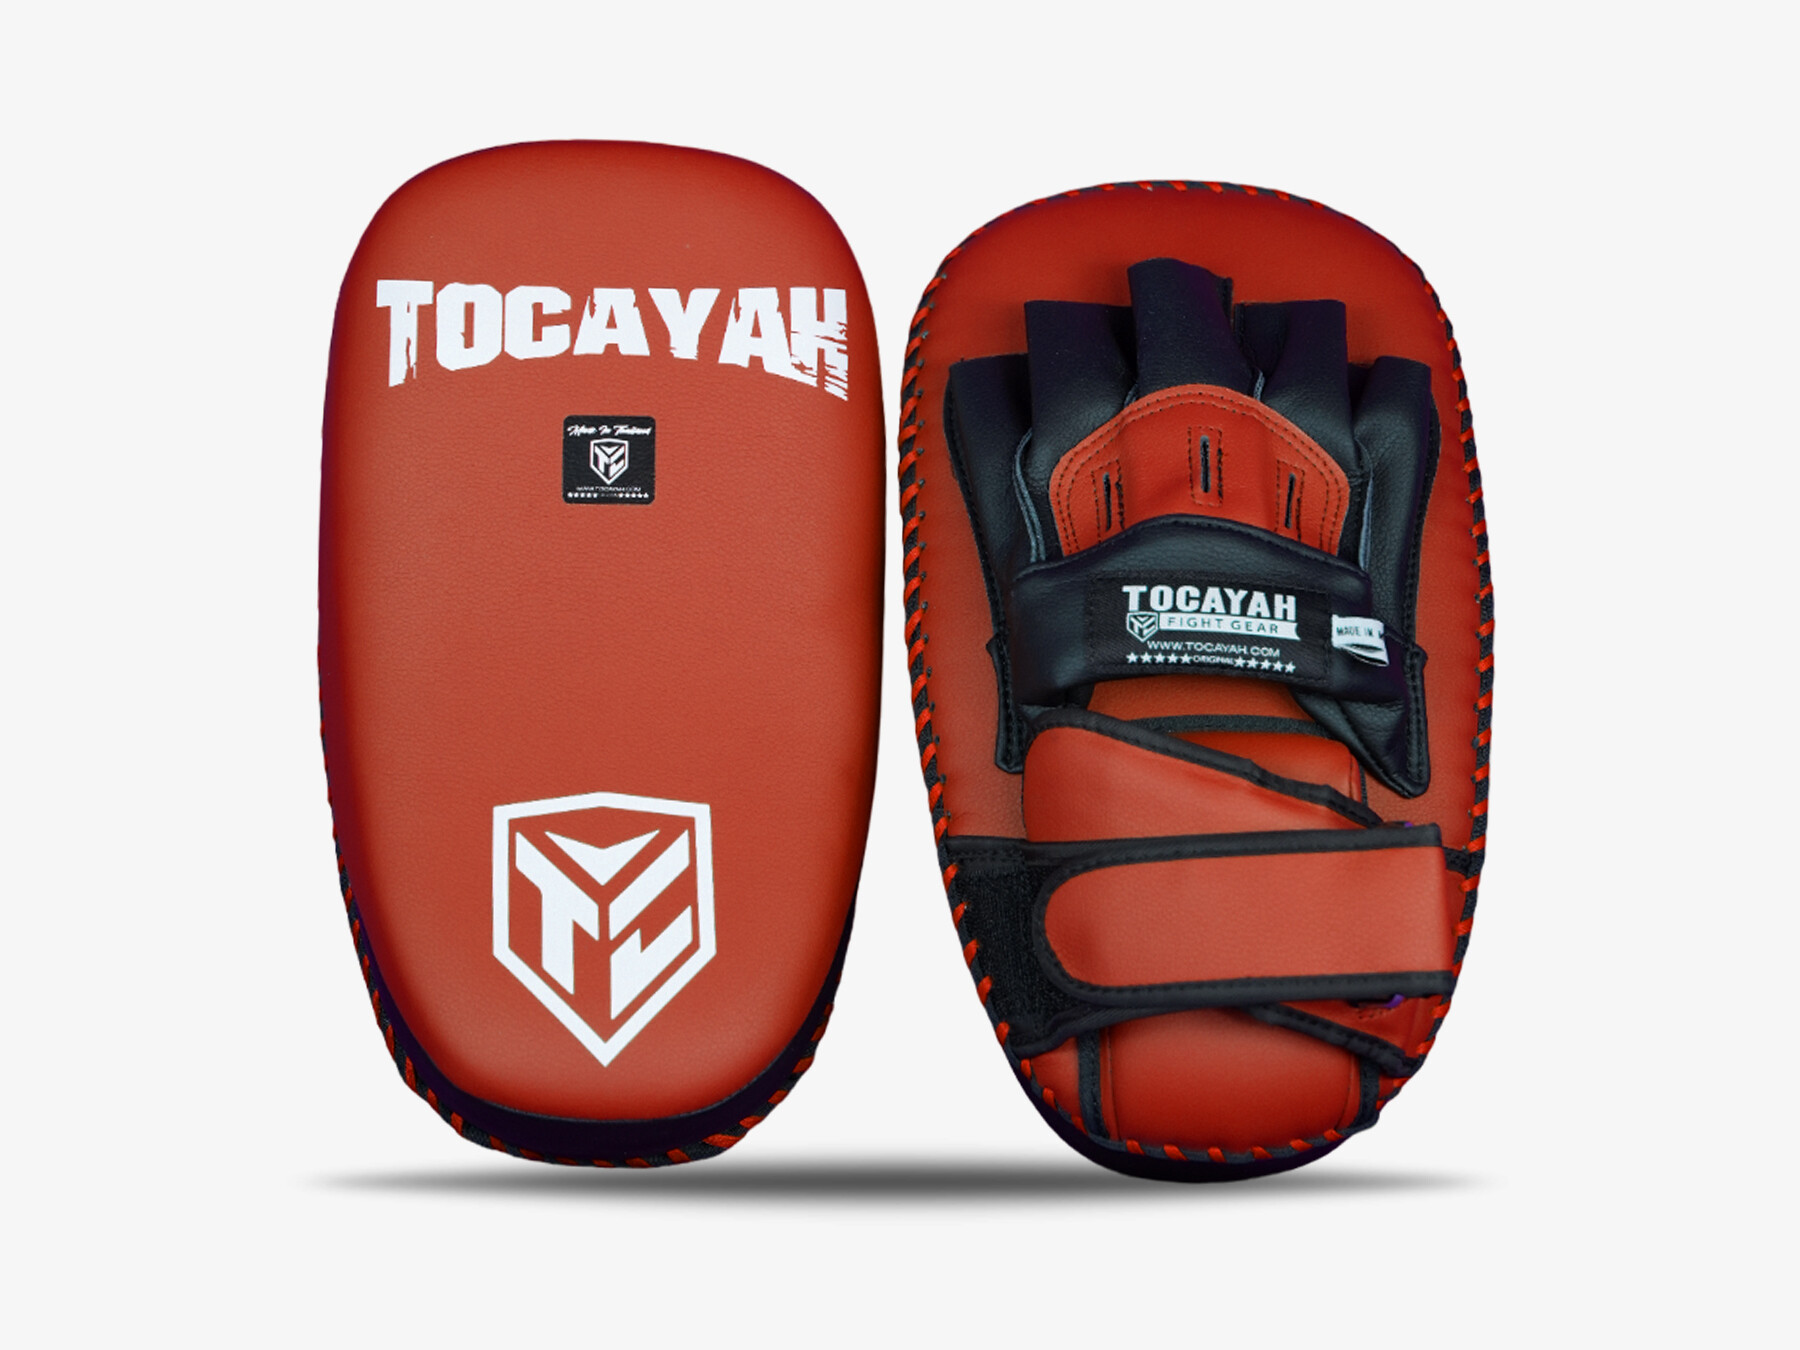 TOCAYAH RED PADS 03